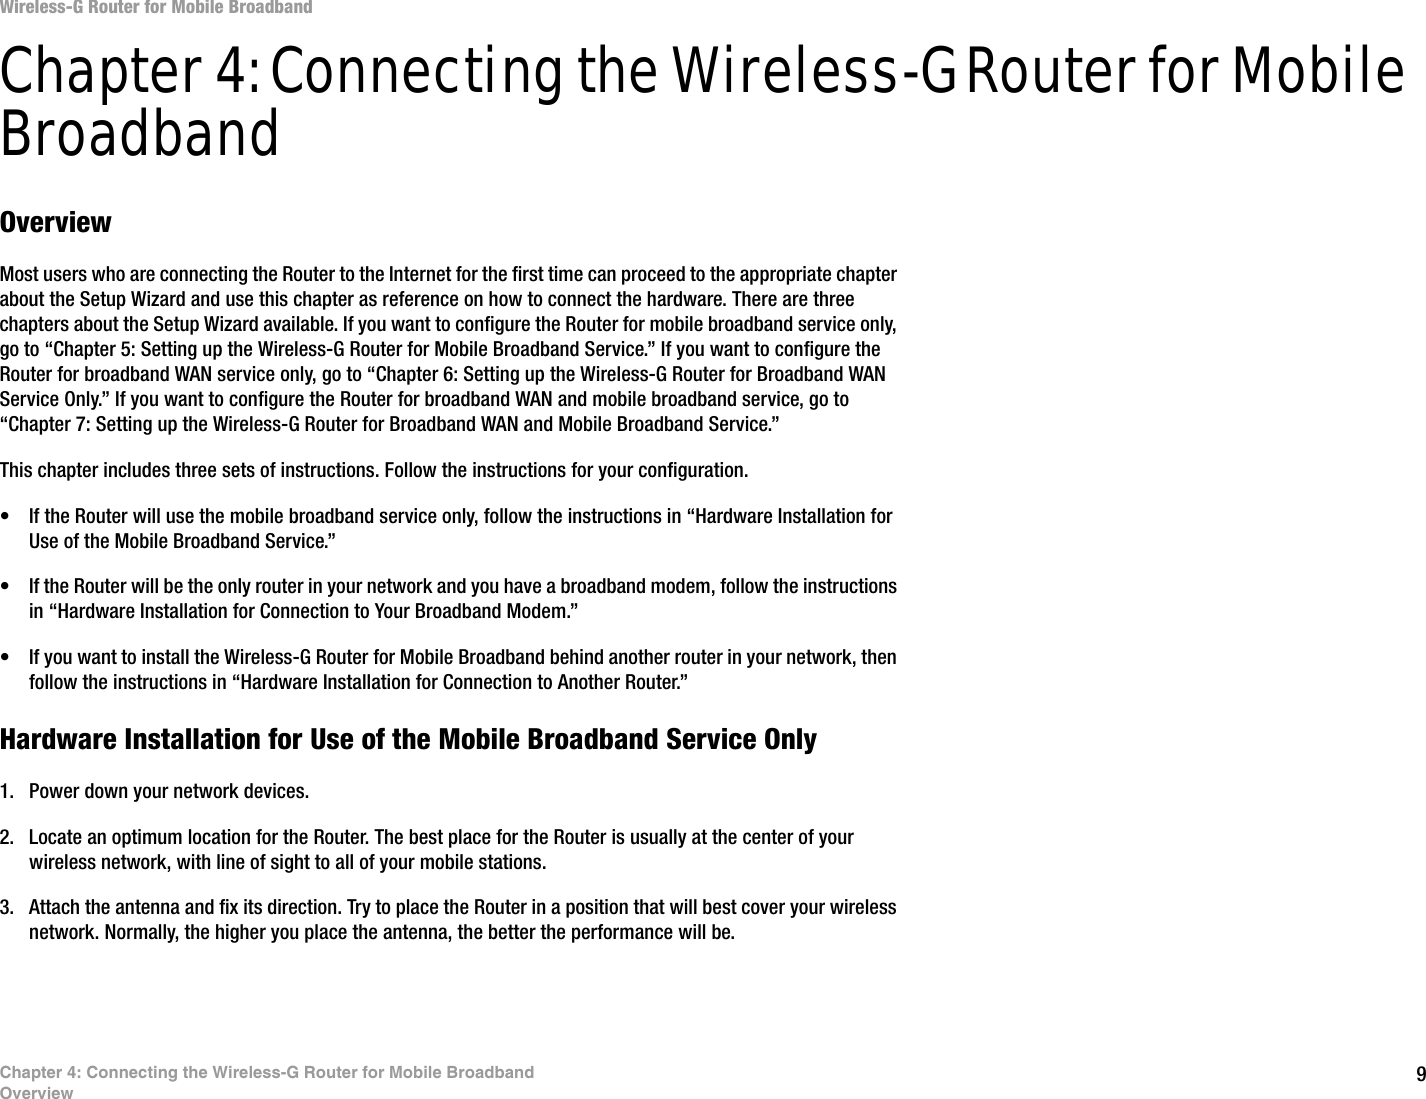 9Chapter 4: Connecting the Wireless-G Router for Mobile BroadbandOverviewWireless-G Router for Mobile BroadbandChapter 4: Connecting the Wireless-G Router for Mobile BroadbandOverviewMost users who are connecting the Router to the Internet for the first time can proceed to the appropriate chapter about the Setup Wizard and use this chapter as reference on how to connect the hardware. There are three chapters about the Setup Wizard available. If you want to configure the Router for mobile broadband service only, go to “Chapter 5: Setting up the Wireless-G Router for Mobile Broadband Service.” If you want to configure the Router for broadband WAN service only, go to “Chapter 6: Setting up the Wireless-G Router for Broadband WAN Service Only.” If you want to configure the Router for broadband WAN and mobile broadband service, go to “Chapter 7: Setting up the Wireless-G Router for Broadband WAN and Mobile Broadband Service.”This chapter includes three sets of instructions. Follow the instructions for your configuration. • If the Router will use the mobile broadband service only, follow the instructions in “Hardware Installation for Use of the Mobile Broadband Service.” • If the Router will be the only router in your network and you have a broadband modem, follow the instructions in “Hardware Installation for Connection to Your Broadband Modem.”• If you want to install the Wireless-G Router for Mobile Broadband behind another router in your network, then follow the instructions in “Hardware Installation for Connection to Another Router.”Hardware Installation for Use of the Mobile Broadband Service Only1. Power down your network devices.2. Locate an optimum location for the Router. The best place for the Router is usually at the center of your wireless network, with line of sight to all of your mobile stations.3. Attach the antenna and fix its direction. Try to place the Router in a position that will best cover your wireless network. Normally, the higher you place the antenna, the better the performance will be.